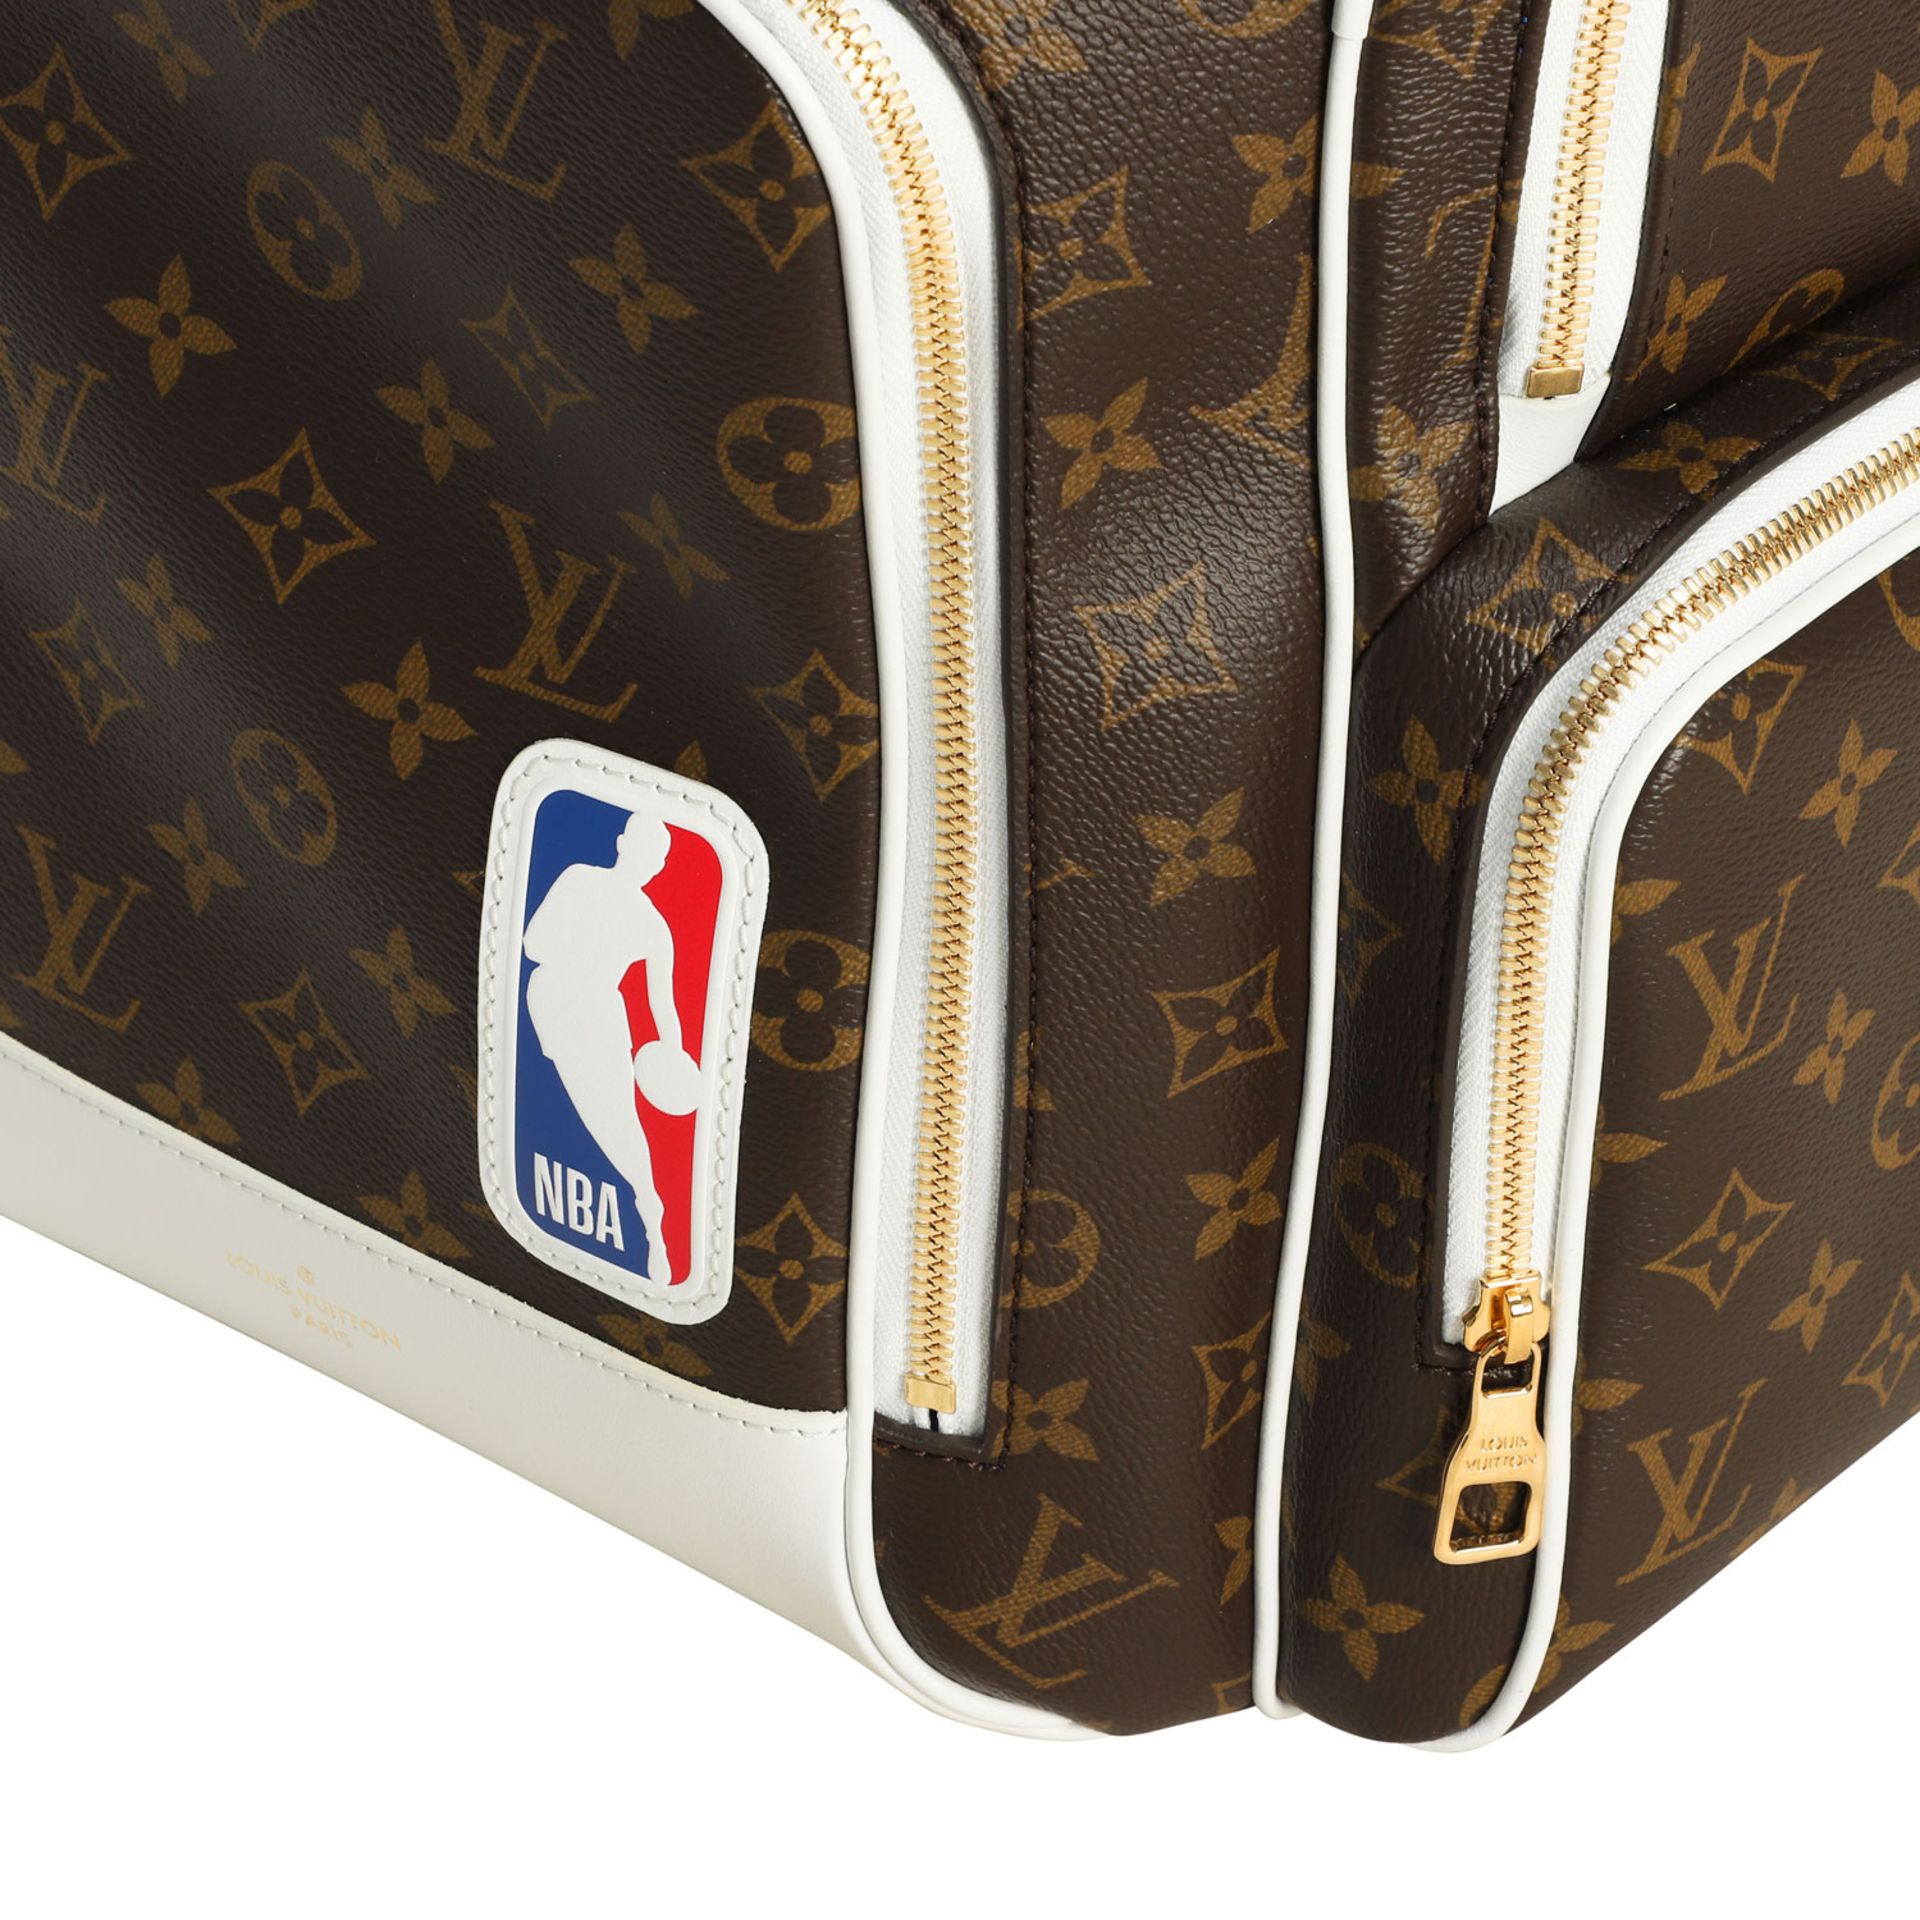 LOUIS VUITTON x NBA Rucksack "NEW BACKPACK". - Image 6 of 8